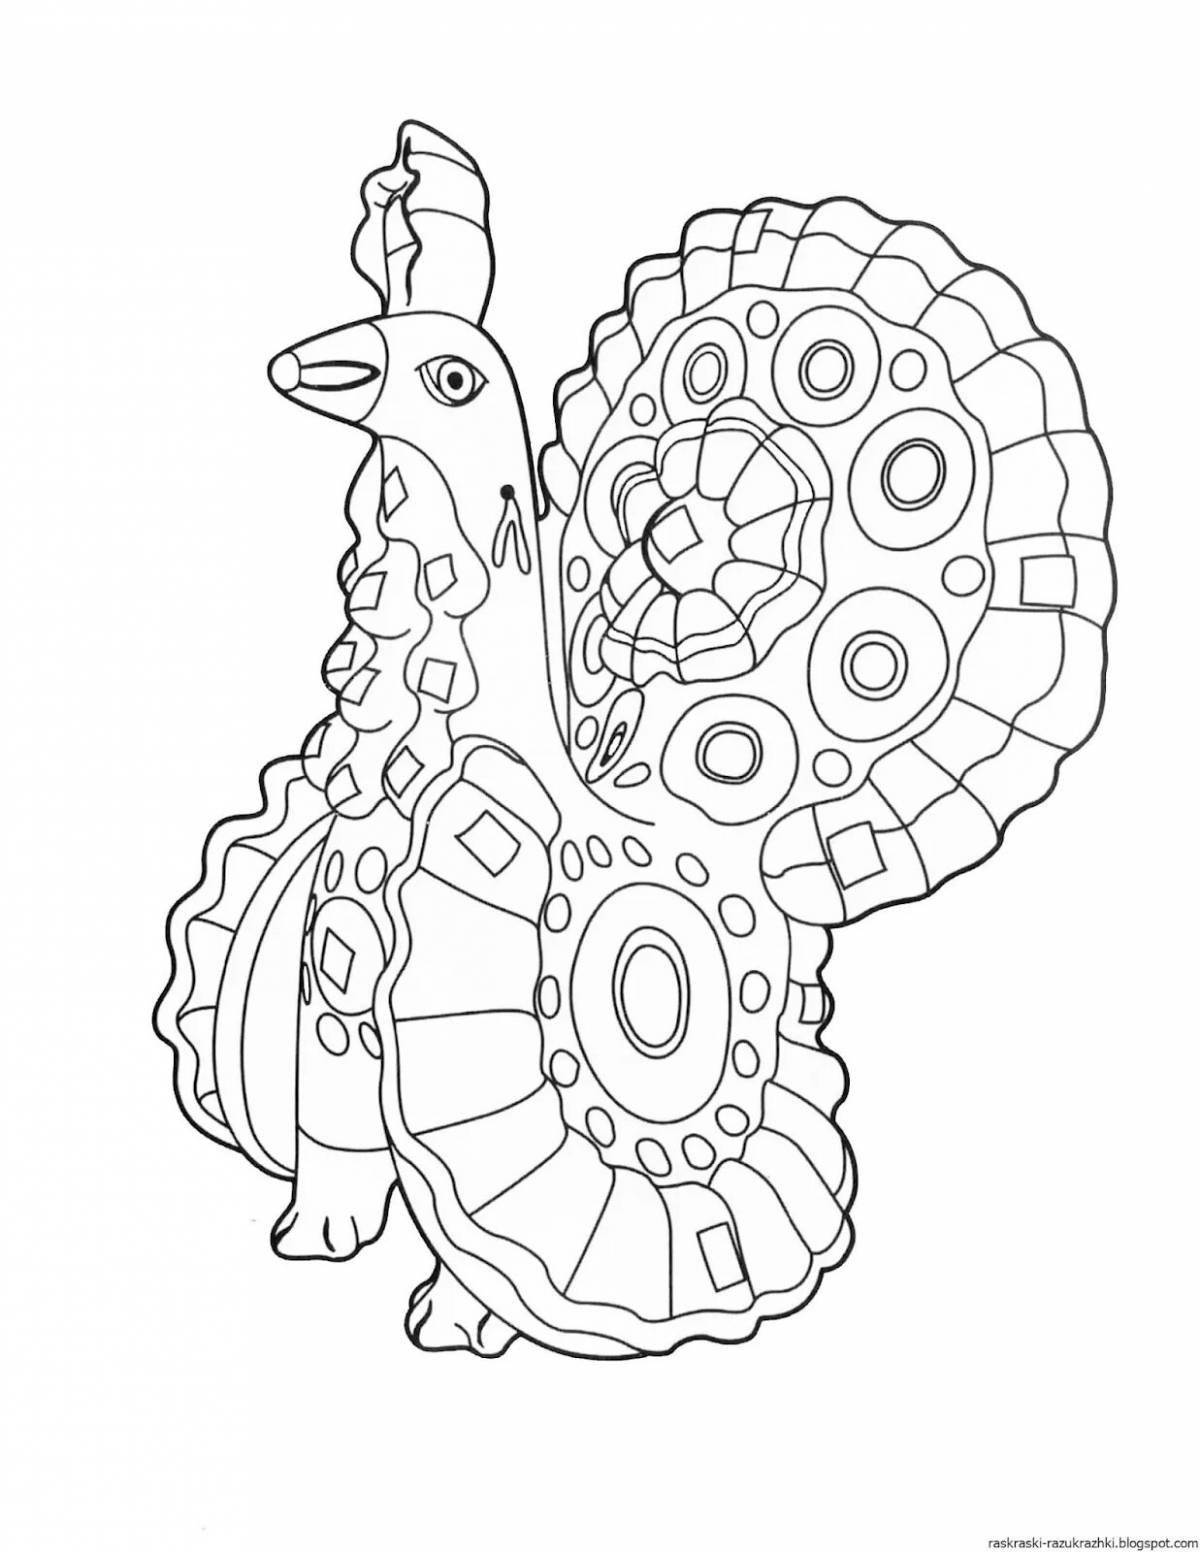 Coloring page charming turkey